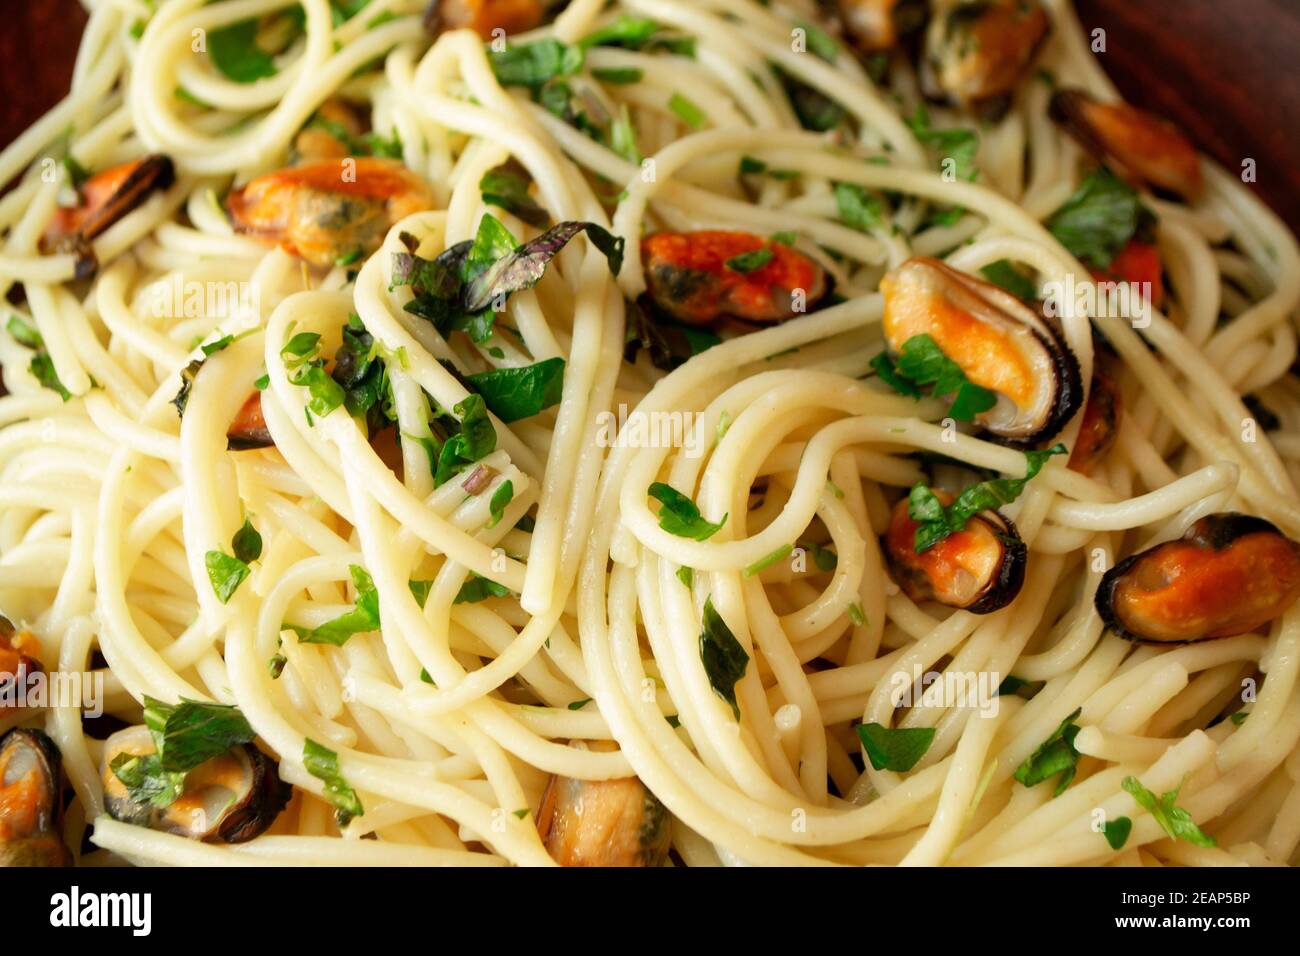 Spaghetti with mussels and clams, Mediterranean food, close up Stock Photo